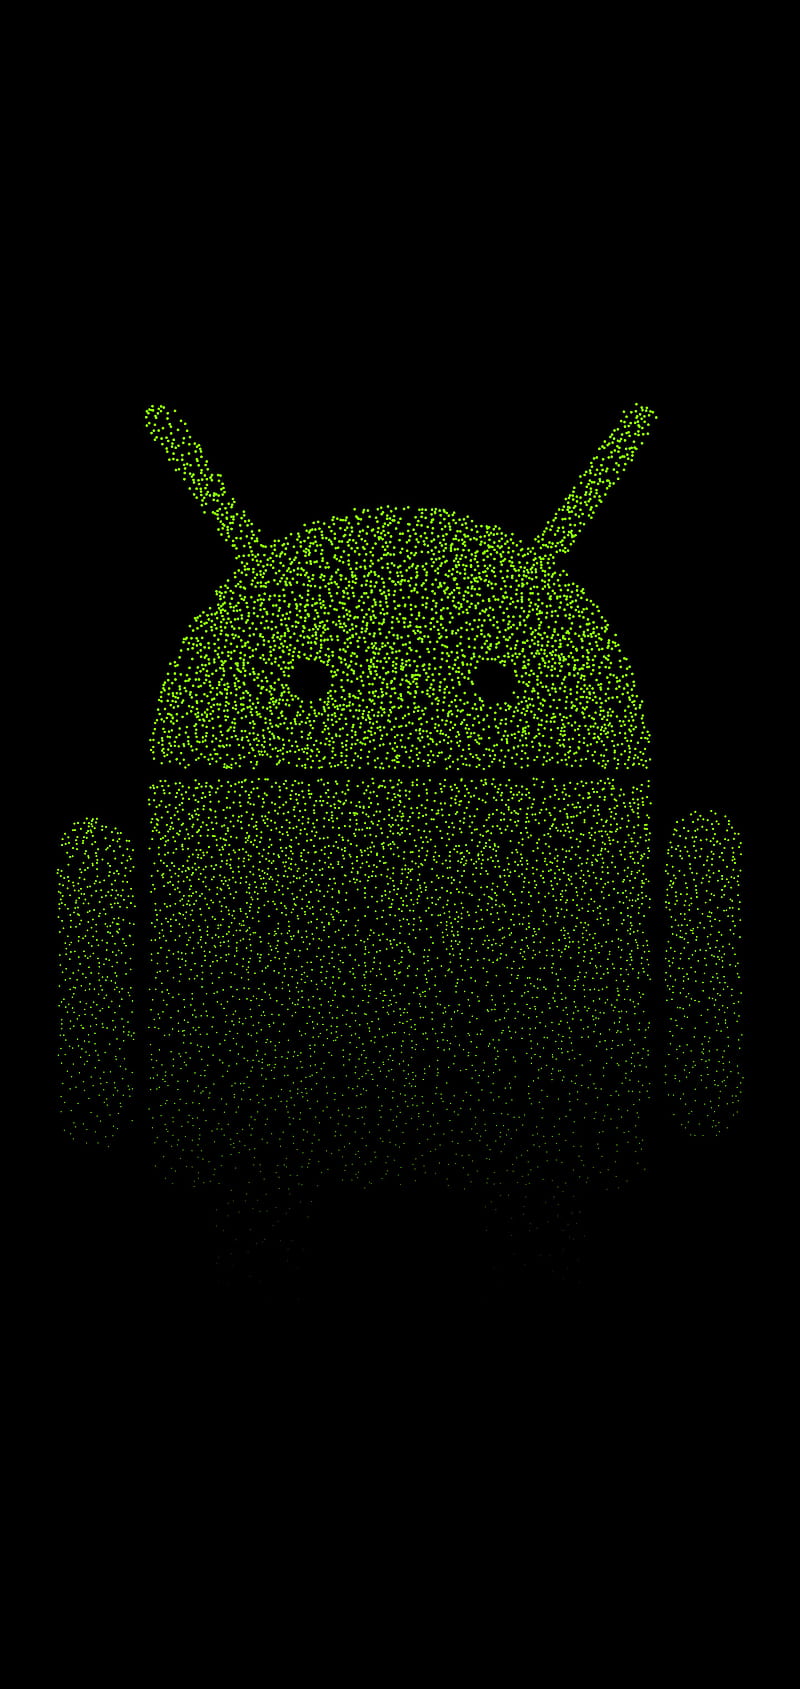 android robot live wallpaper